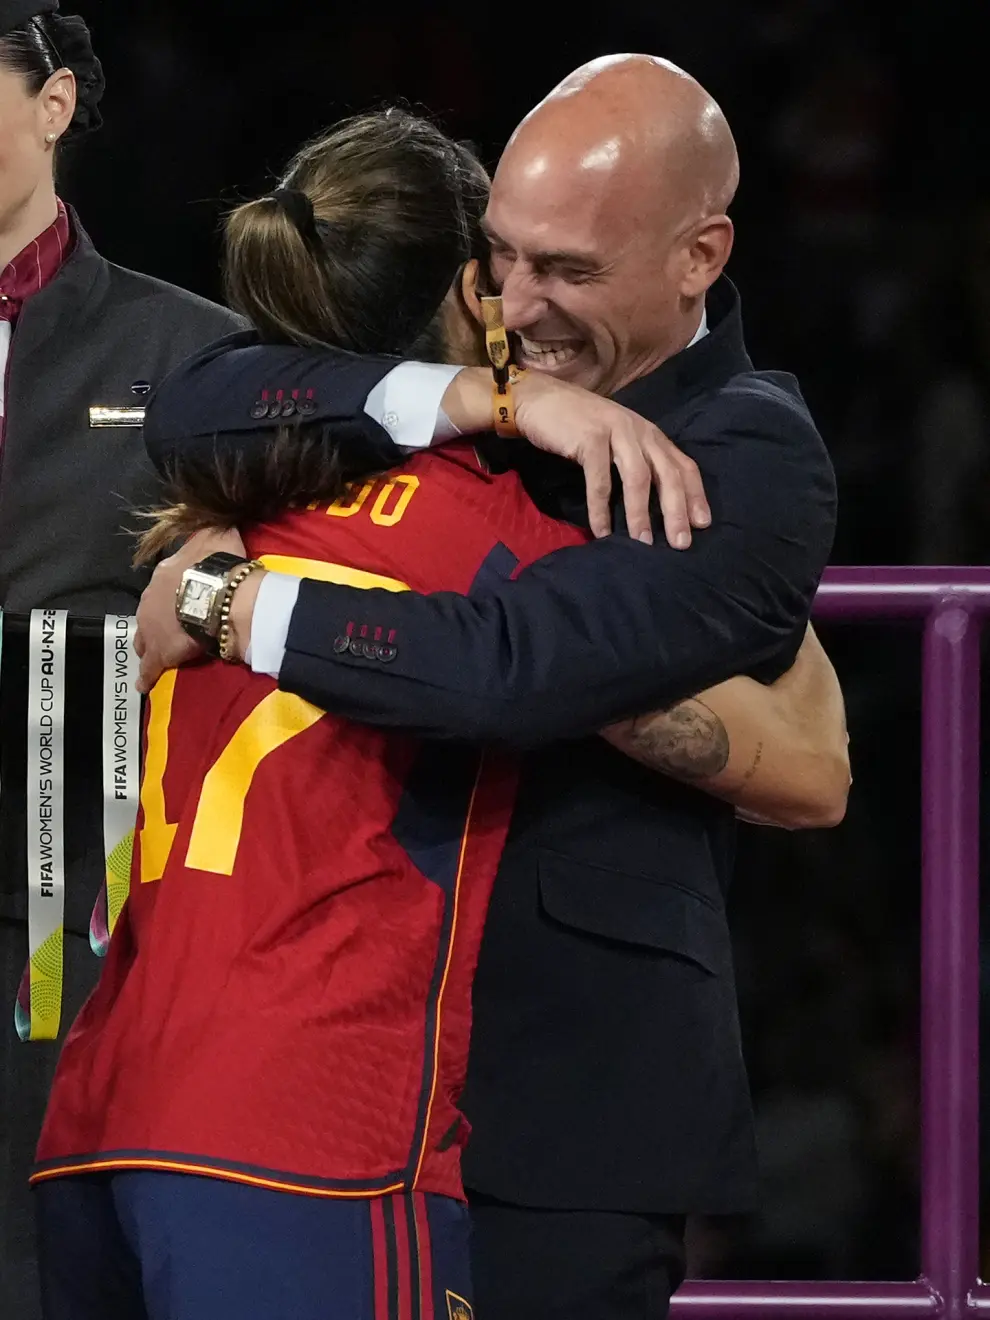 President of Spain's soccer federation Luis Rubiales embraces Alba Redondo during the awards ceremony for the Women's World Cup soccer final at Stadium Australia in Sydney, Australia, Sunday, Aug. 20, 2023. Spain defeated England in the final. (AP Photo/Rick Rycroft)